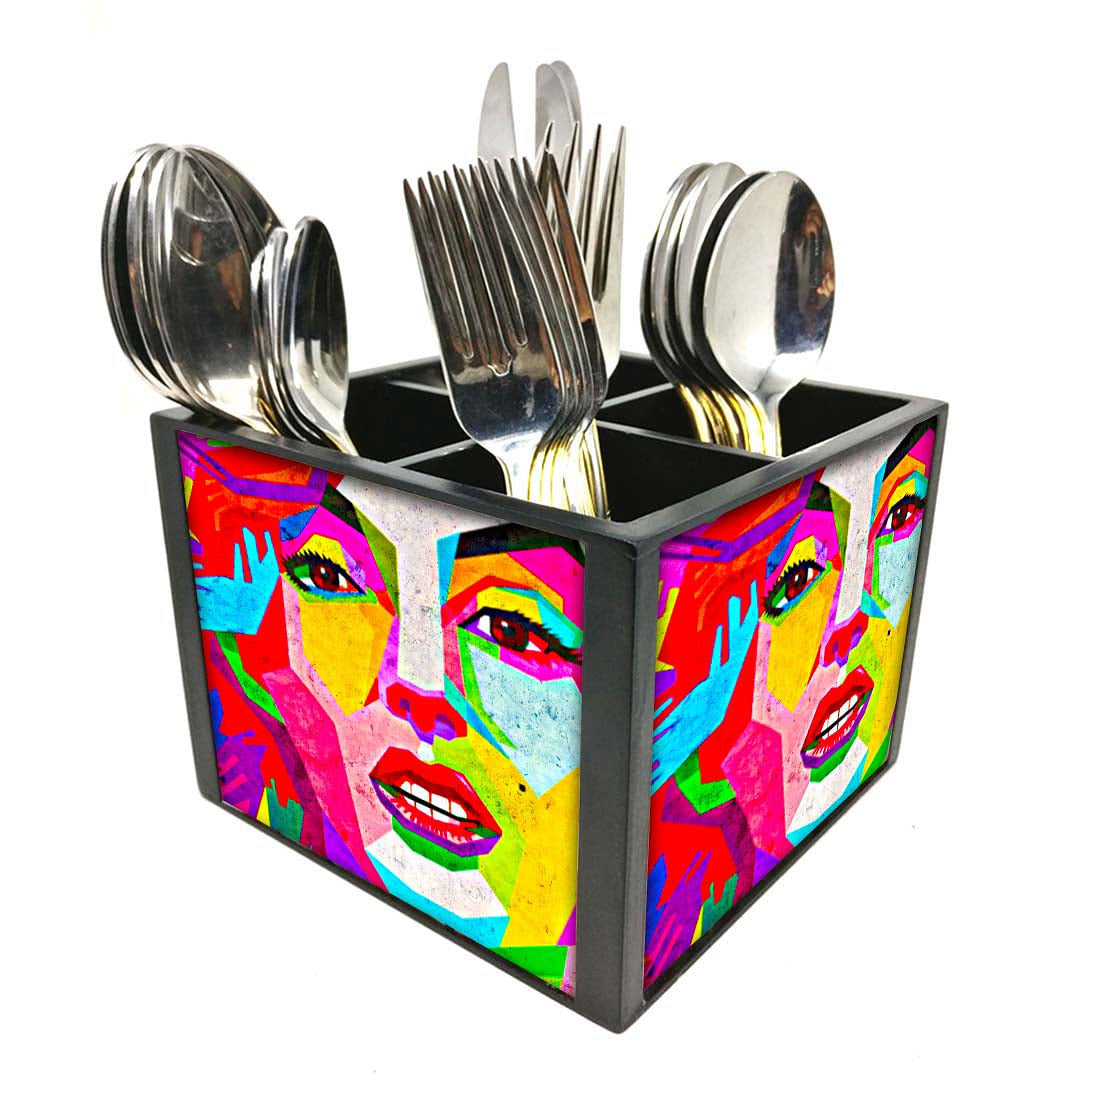 Marilyn Art Cutlery Holder Stand Silverware Caddy Organizer for Spoons, Forks & Knives-Made of Pinewood Nutcase